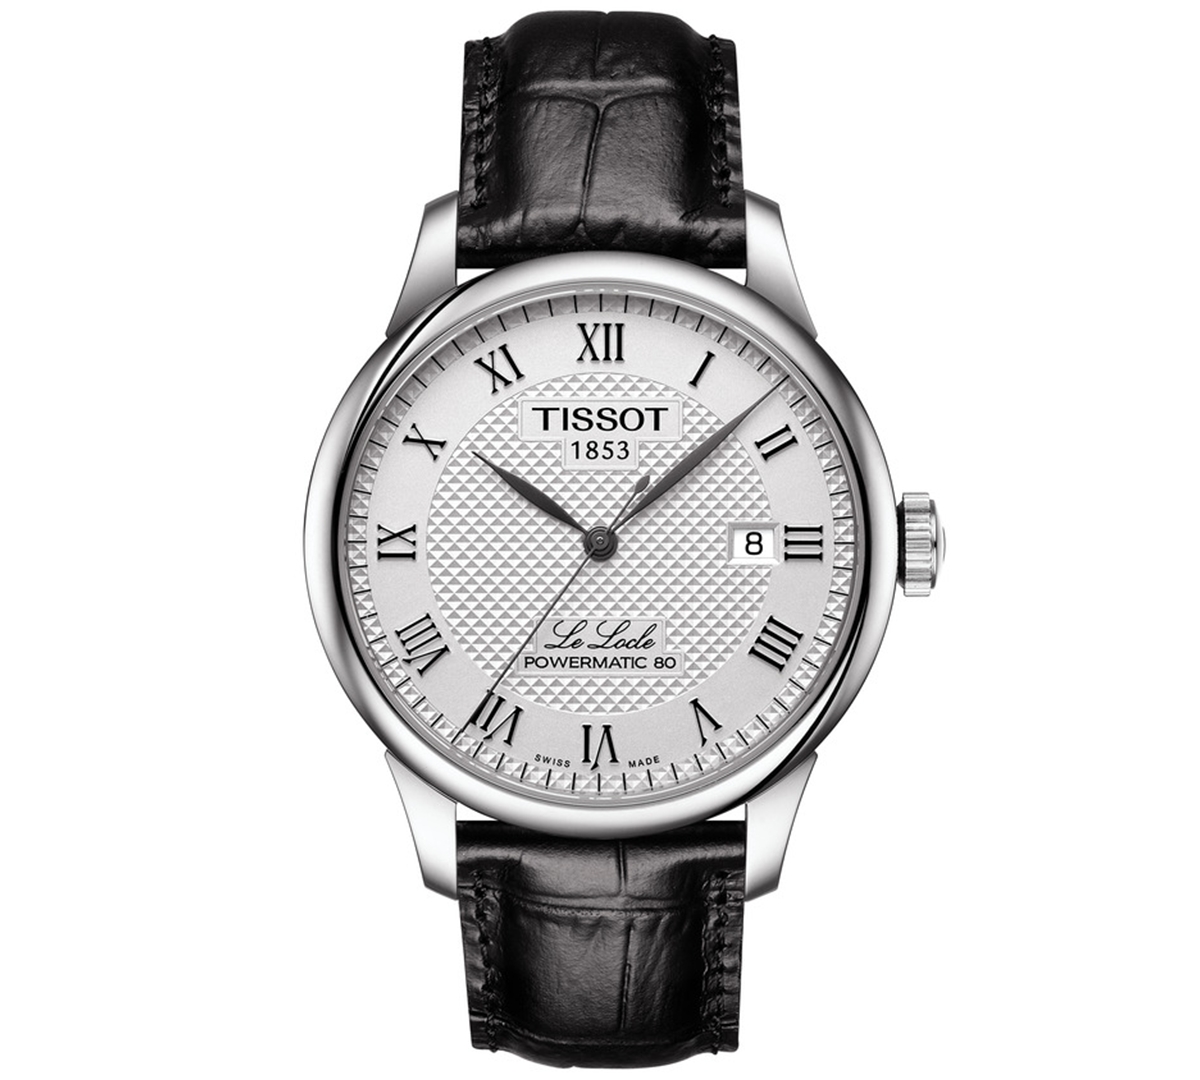 Tissot Men's Swiss Automatic T-classic Le Locle Powermatic 80 Black Leather Strap Watch 39.3mm In No Color